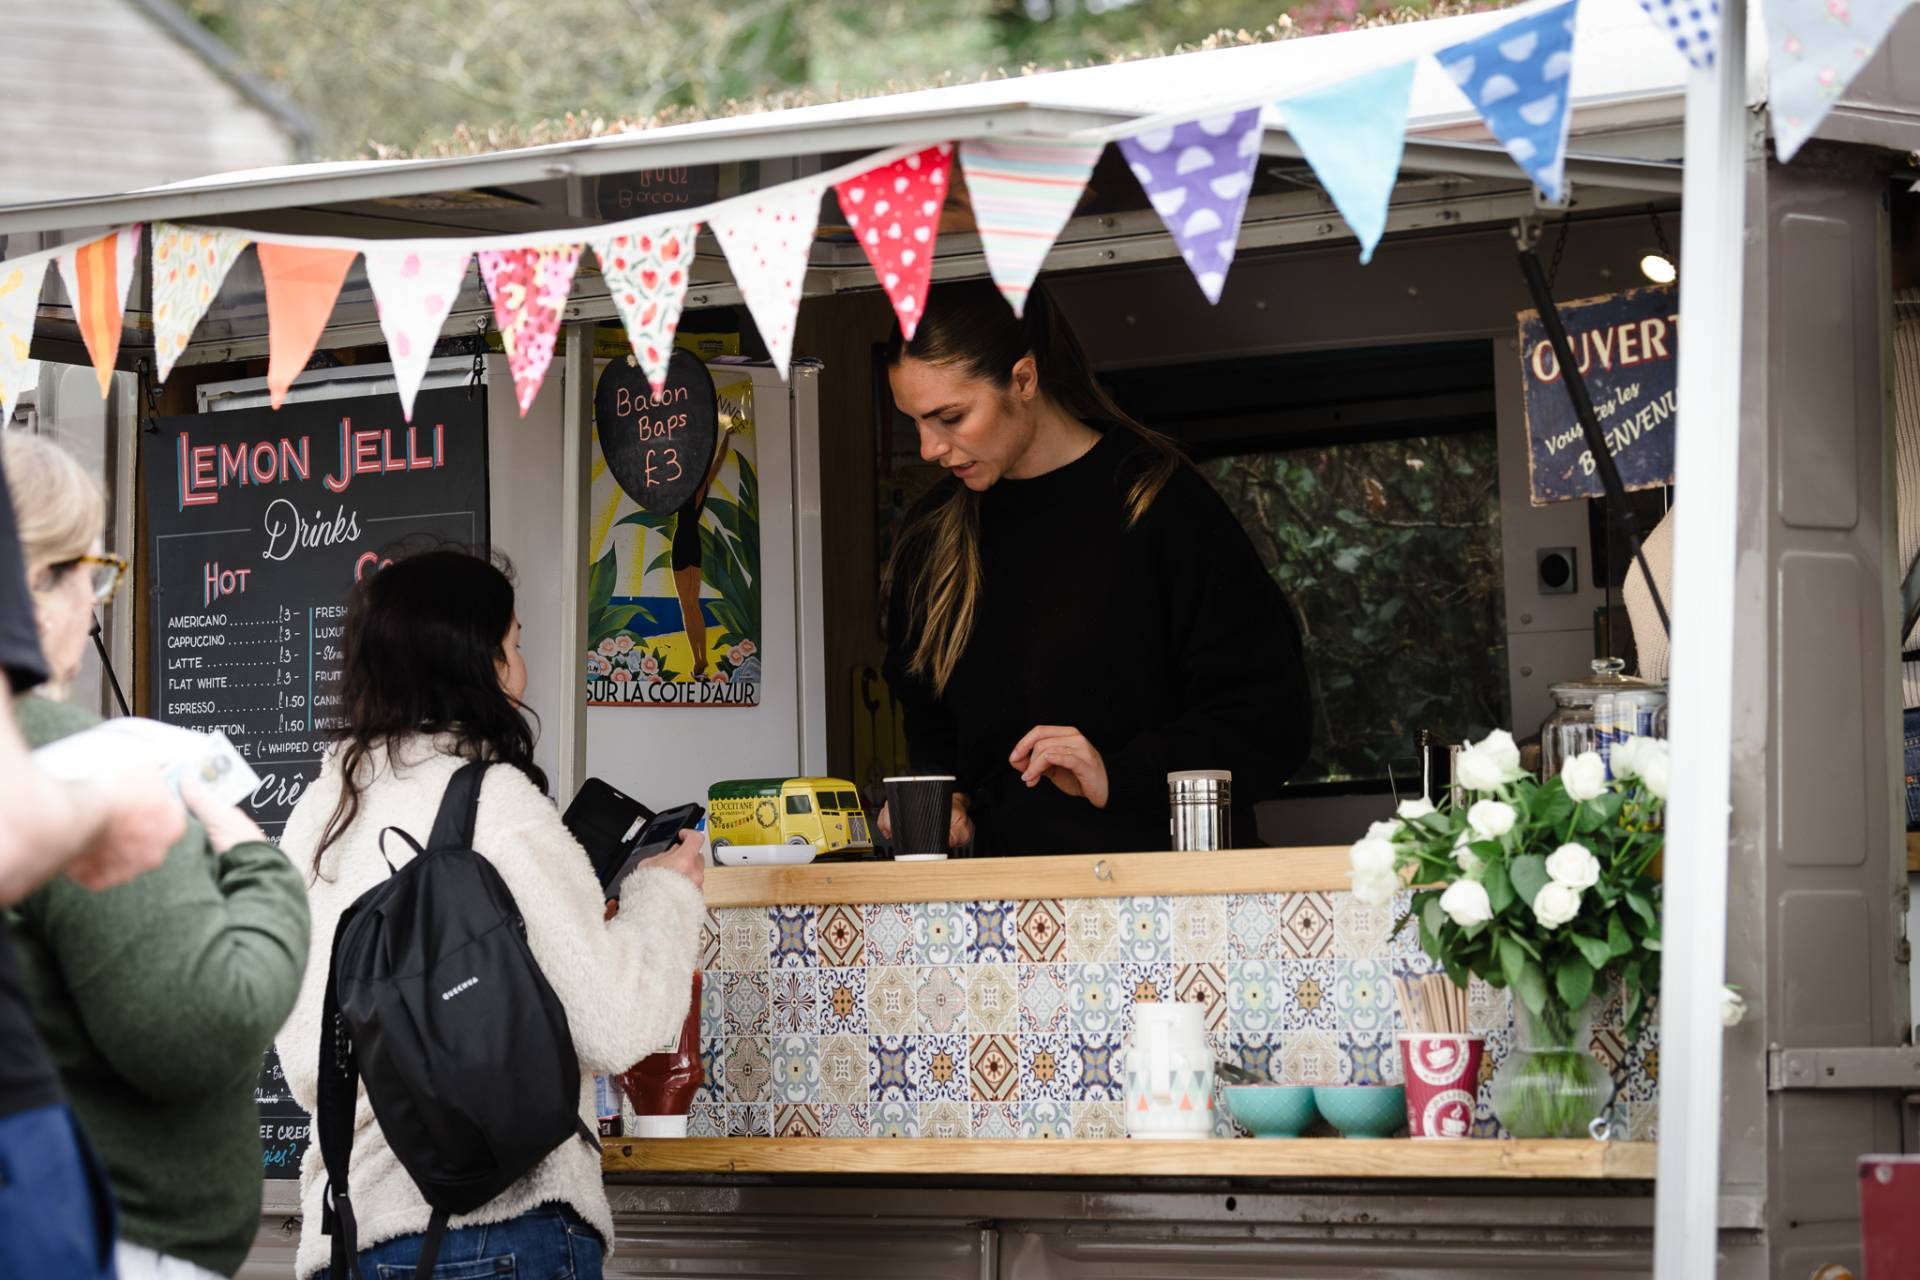 Lemon Jelli serving coffee at their stall